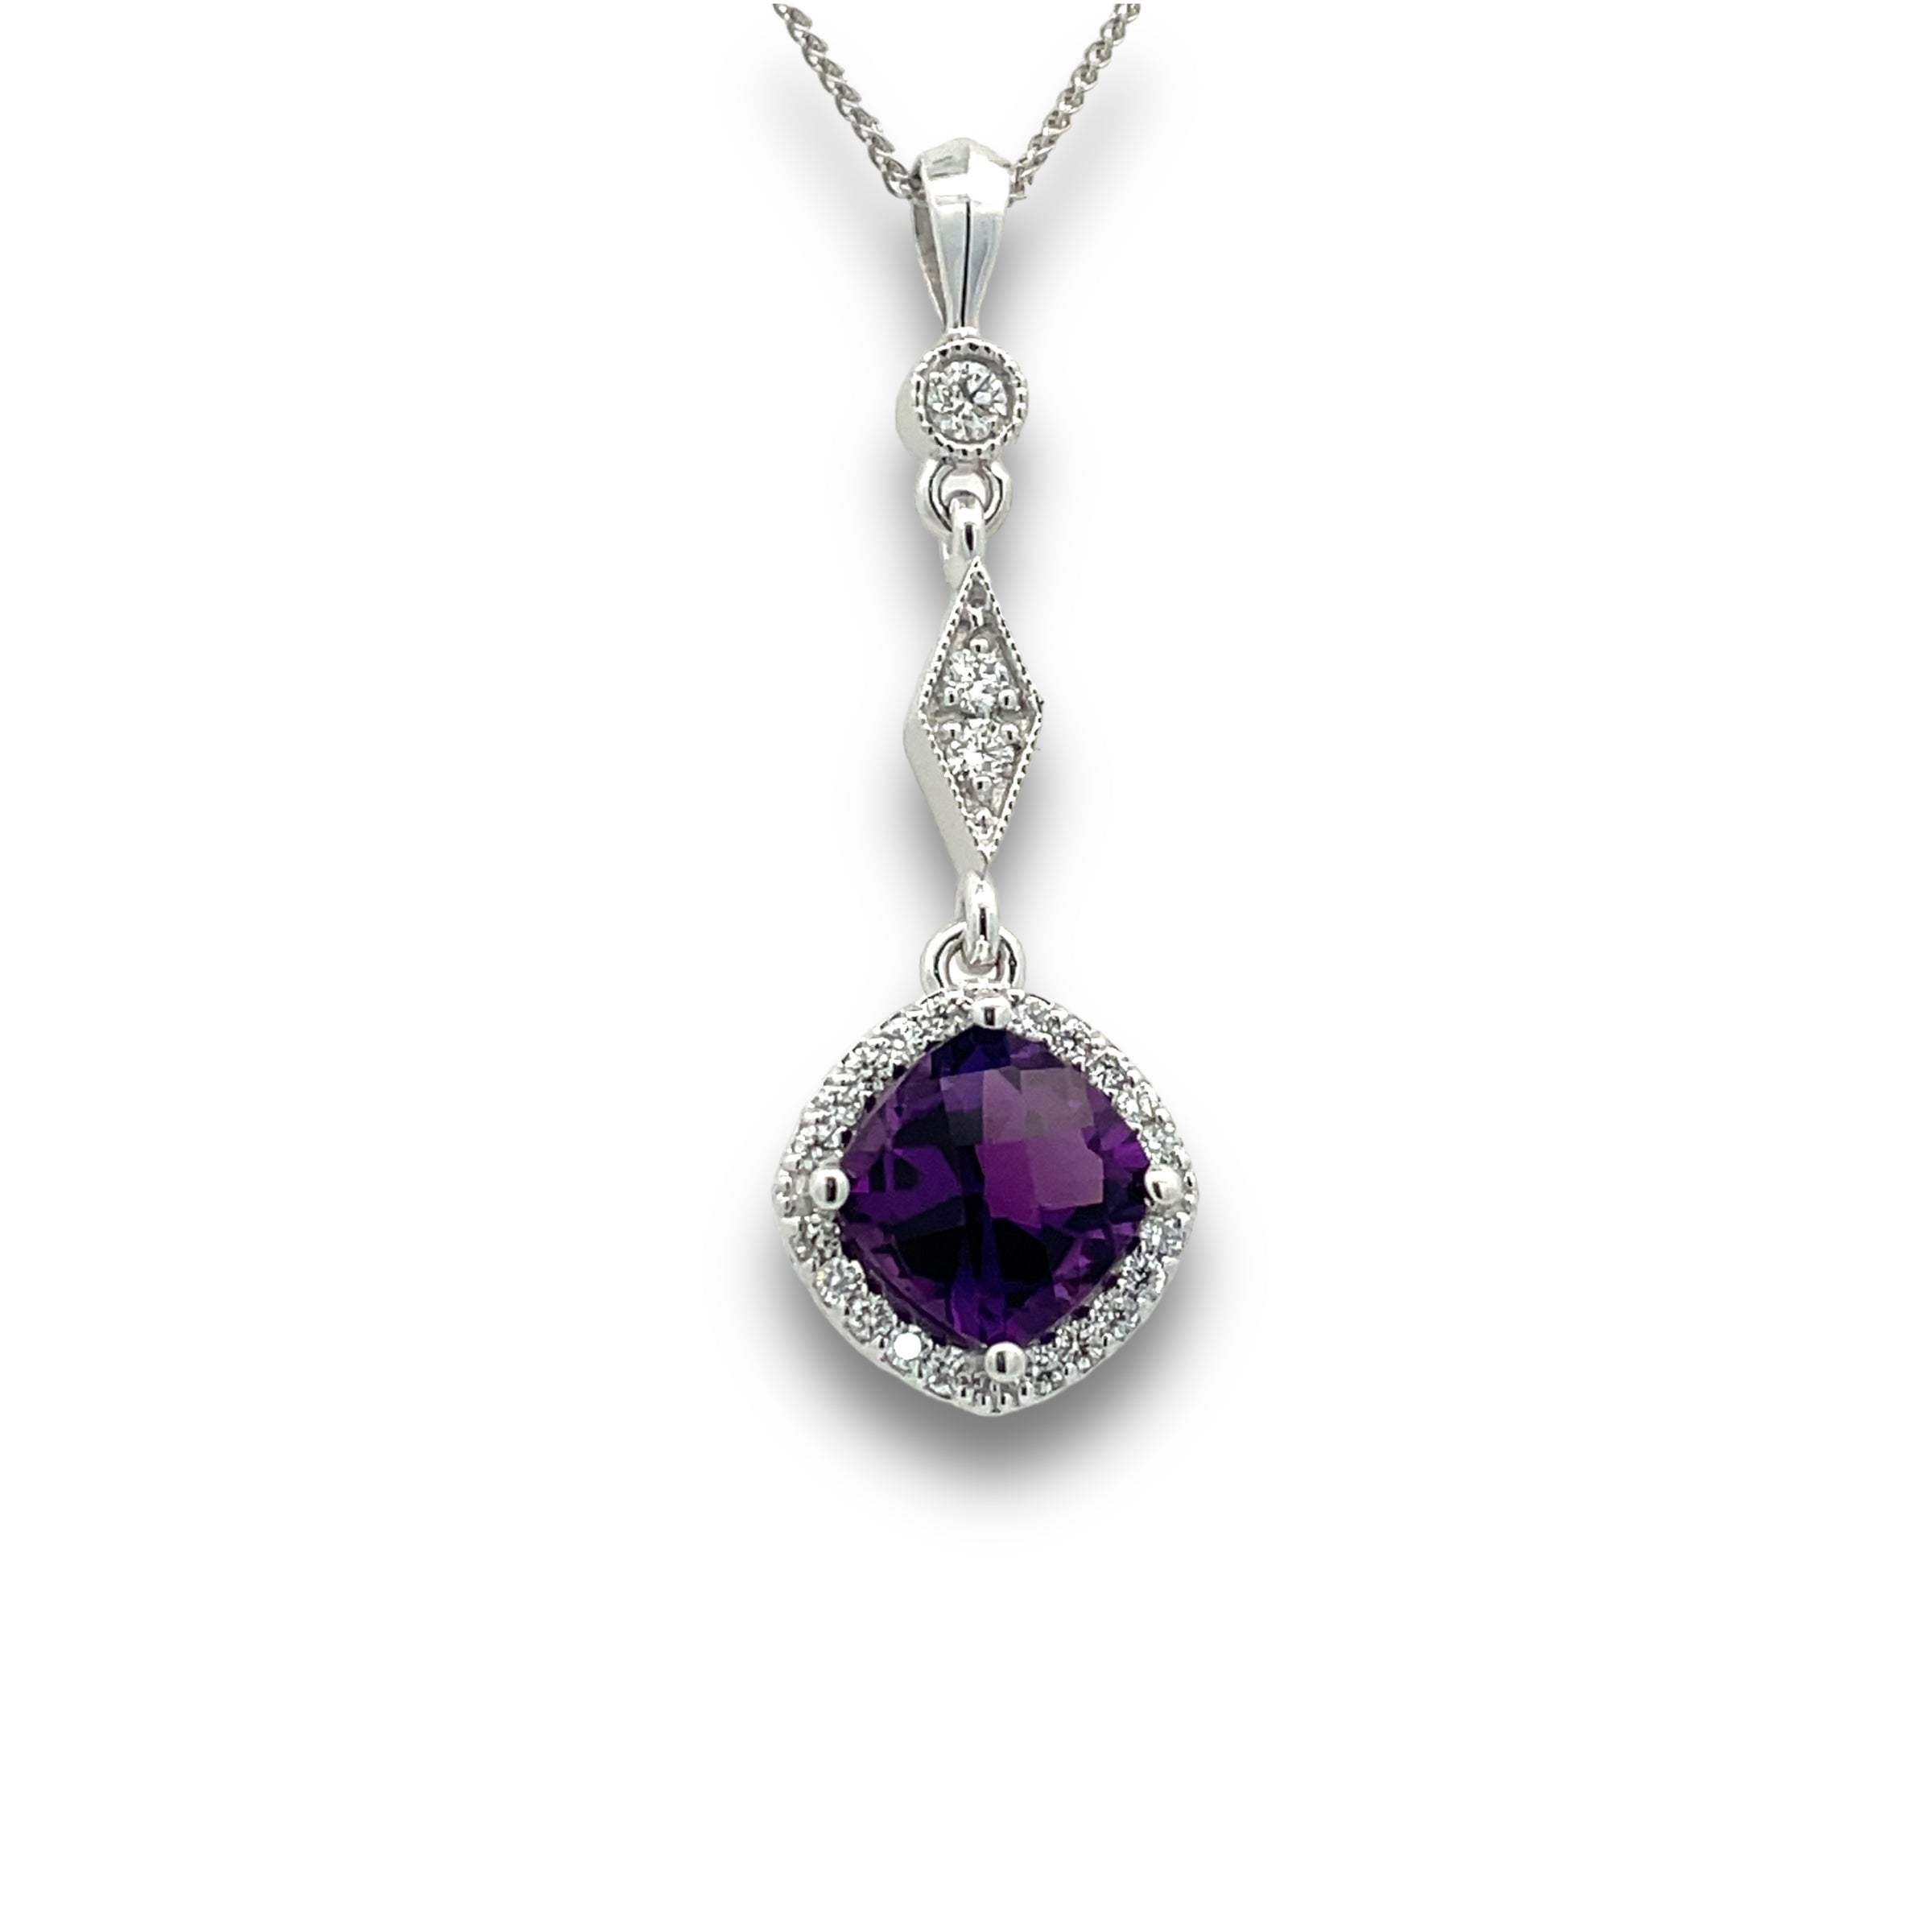 Allegra Necklace 14k White Gold Cushion-cut Amethyst with Diamonds